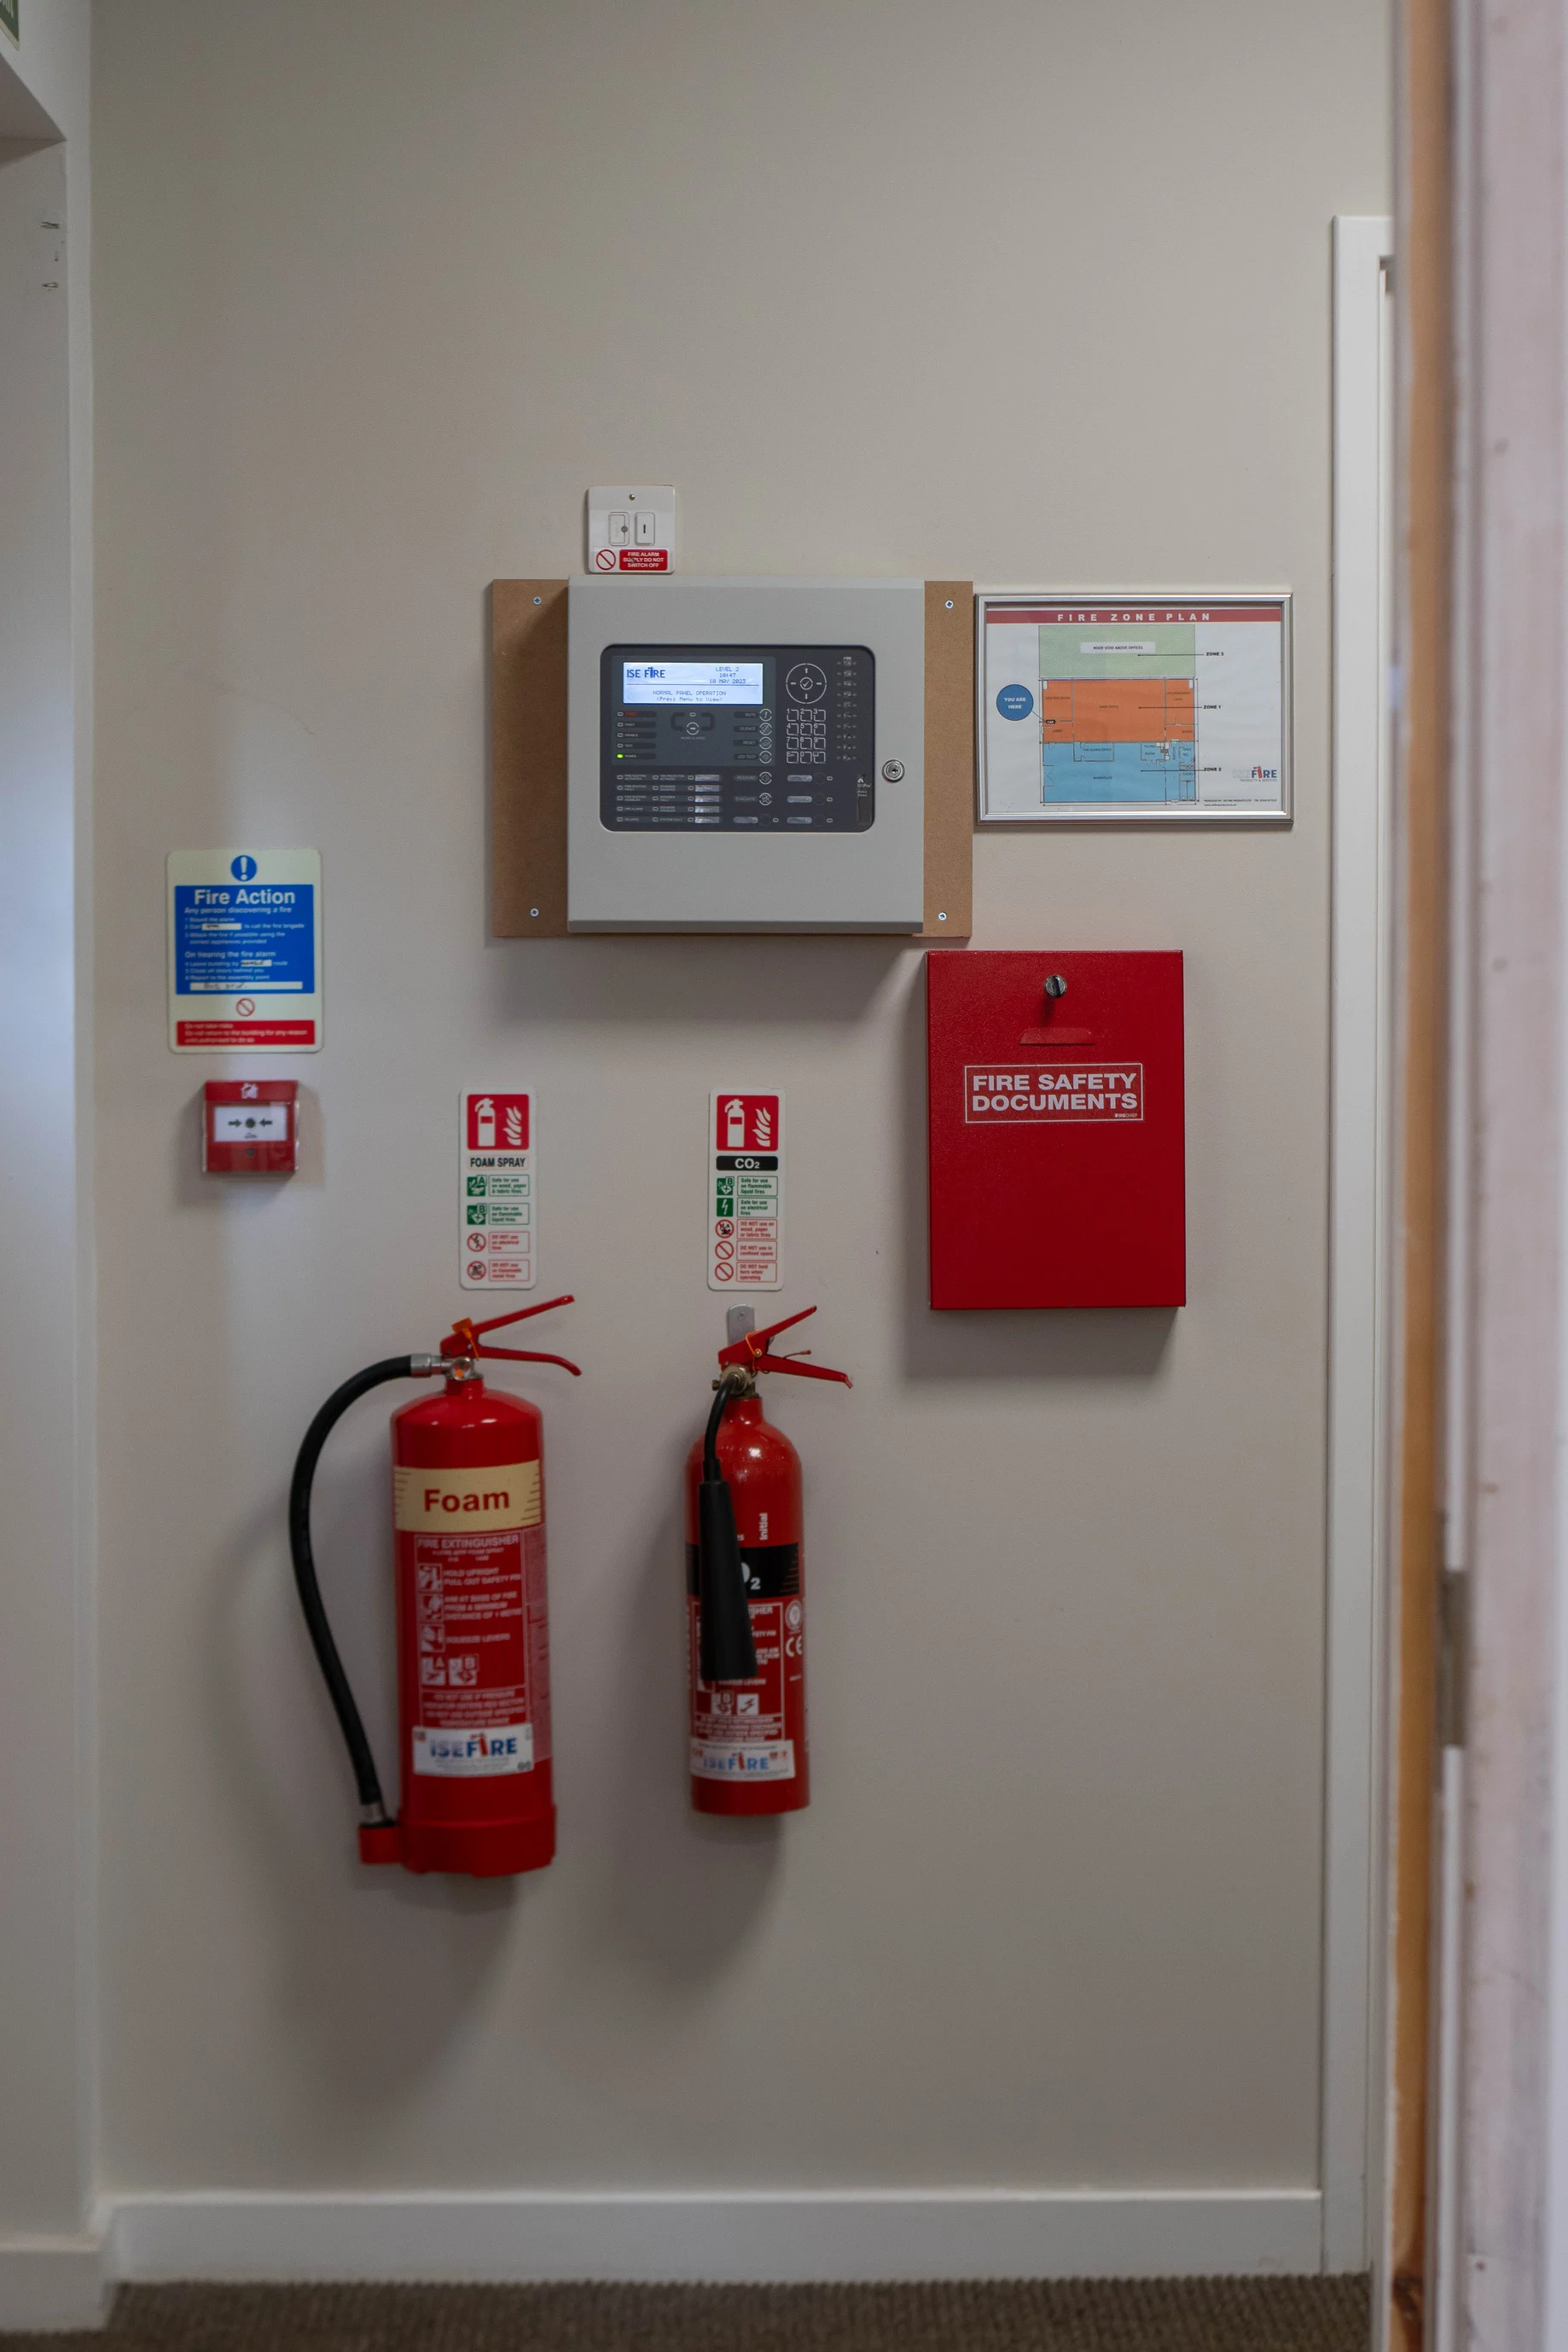 Fire extinguisher - Fire safety in workplace.